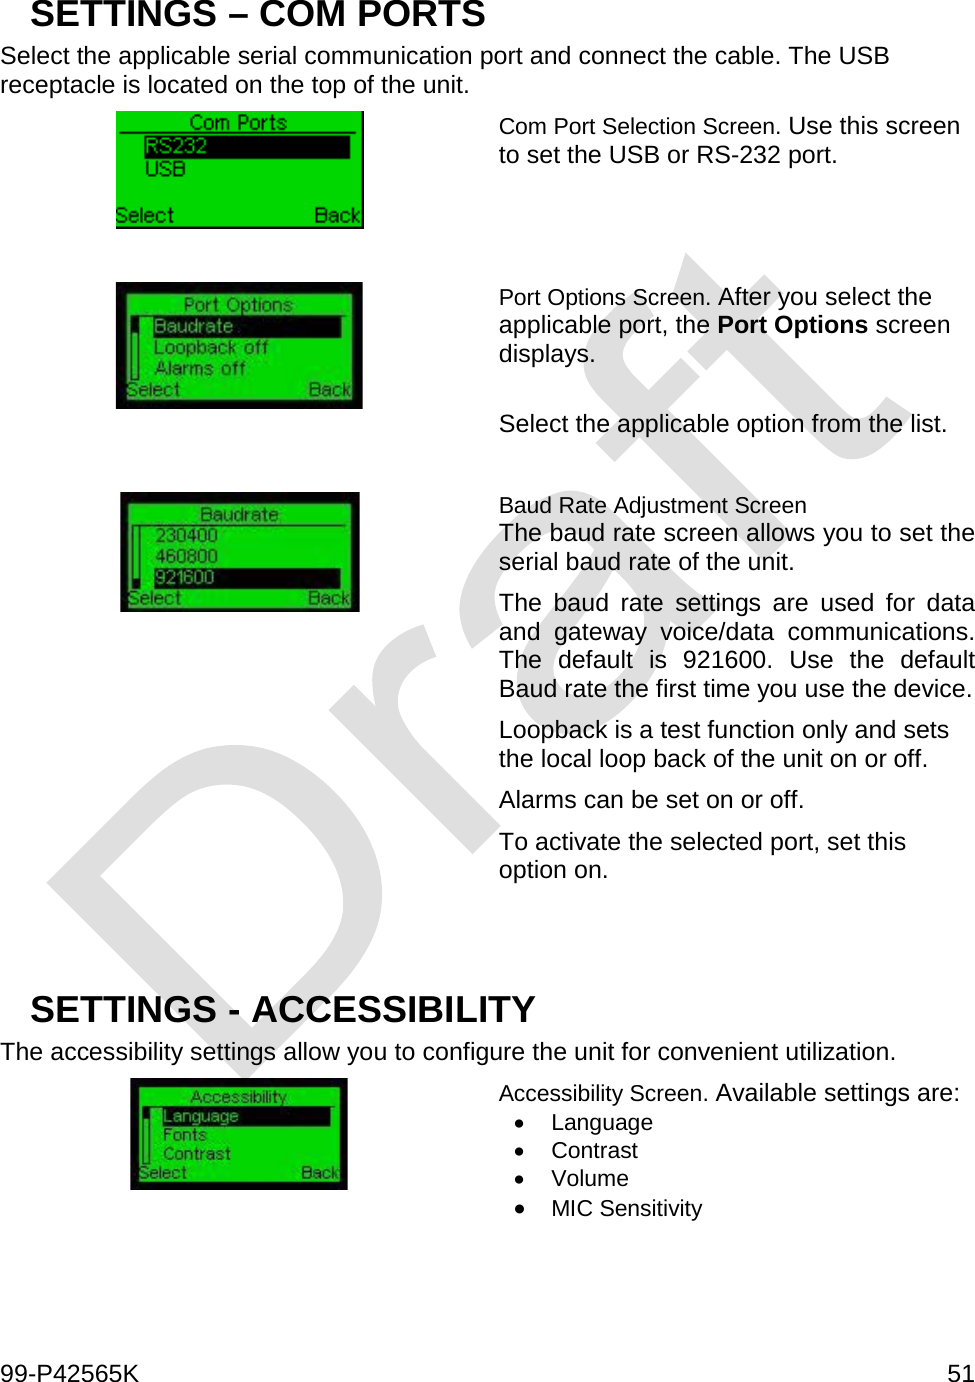  99-P42565K     51  SETTINGS – COM PORTS Select the applicable serial communication port and connect the cable. The USB receptacle is located on the top of the unit.   Com Port Selection Screen. Use this screen to set the USB or RS-232 port.   Port Options Screen. After you select the applicable port, the Port Options screen displays.  Select the applicable option from the list.   Baud Rate Adjustment Screen The baud rate screen allows you to set the serial baud rate of the unit. The baud rate settings are used for data and gateway voice/data communications. The default is 921600. Use the default Baud rate the first time you use the device. Loopback is a test function only and sets the local loop back of the unit on or off.  Alarms can be set on or off.  To activate the selected port, set this option on.   SETTINGS - ACCESSIBILITY  The accessibility settings allow you to configure the unit for convenient utilization.   Accessibility Screen. Available settings are: • Language • Contrast • Volume • MIC Sensitivity   